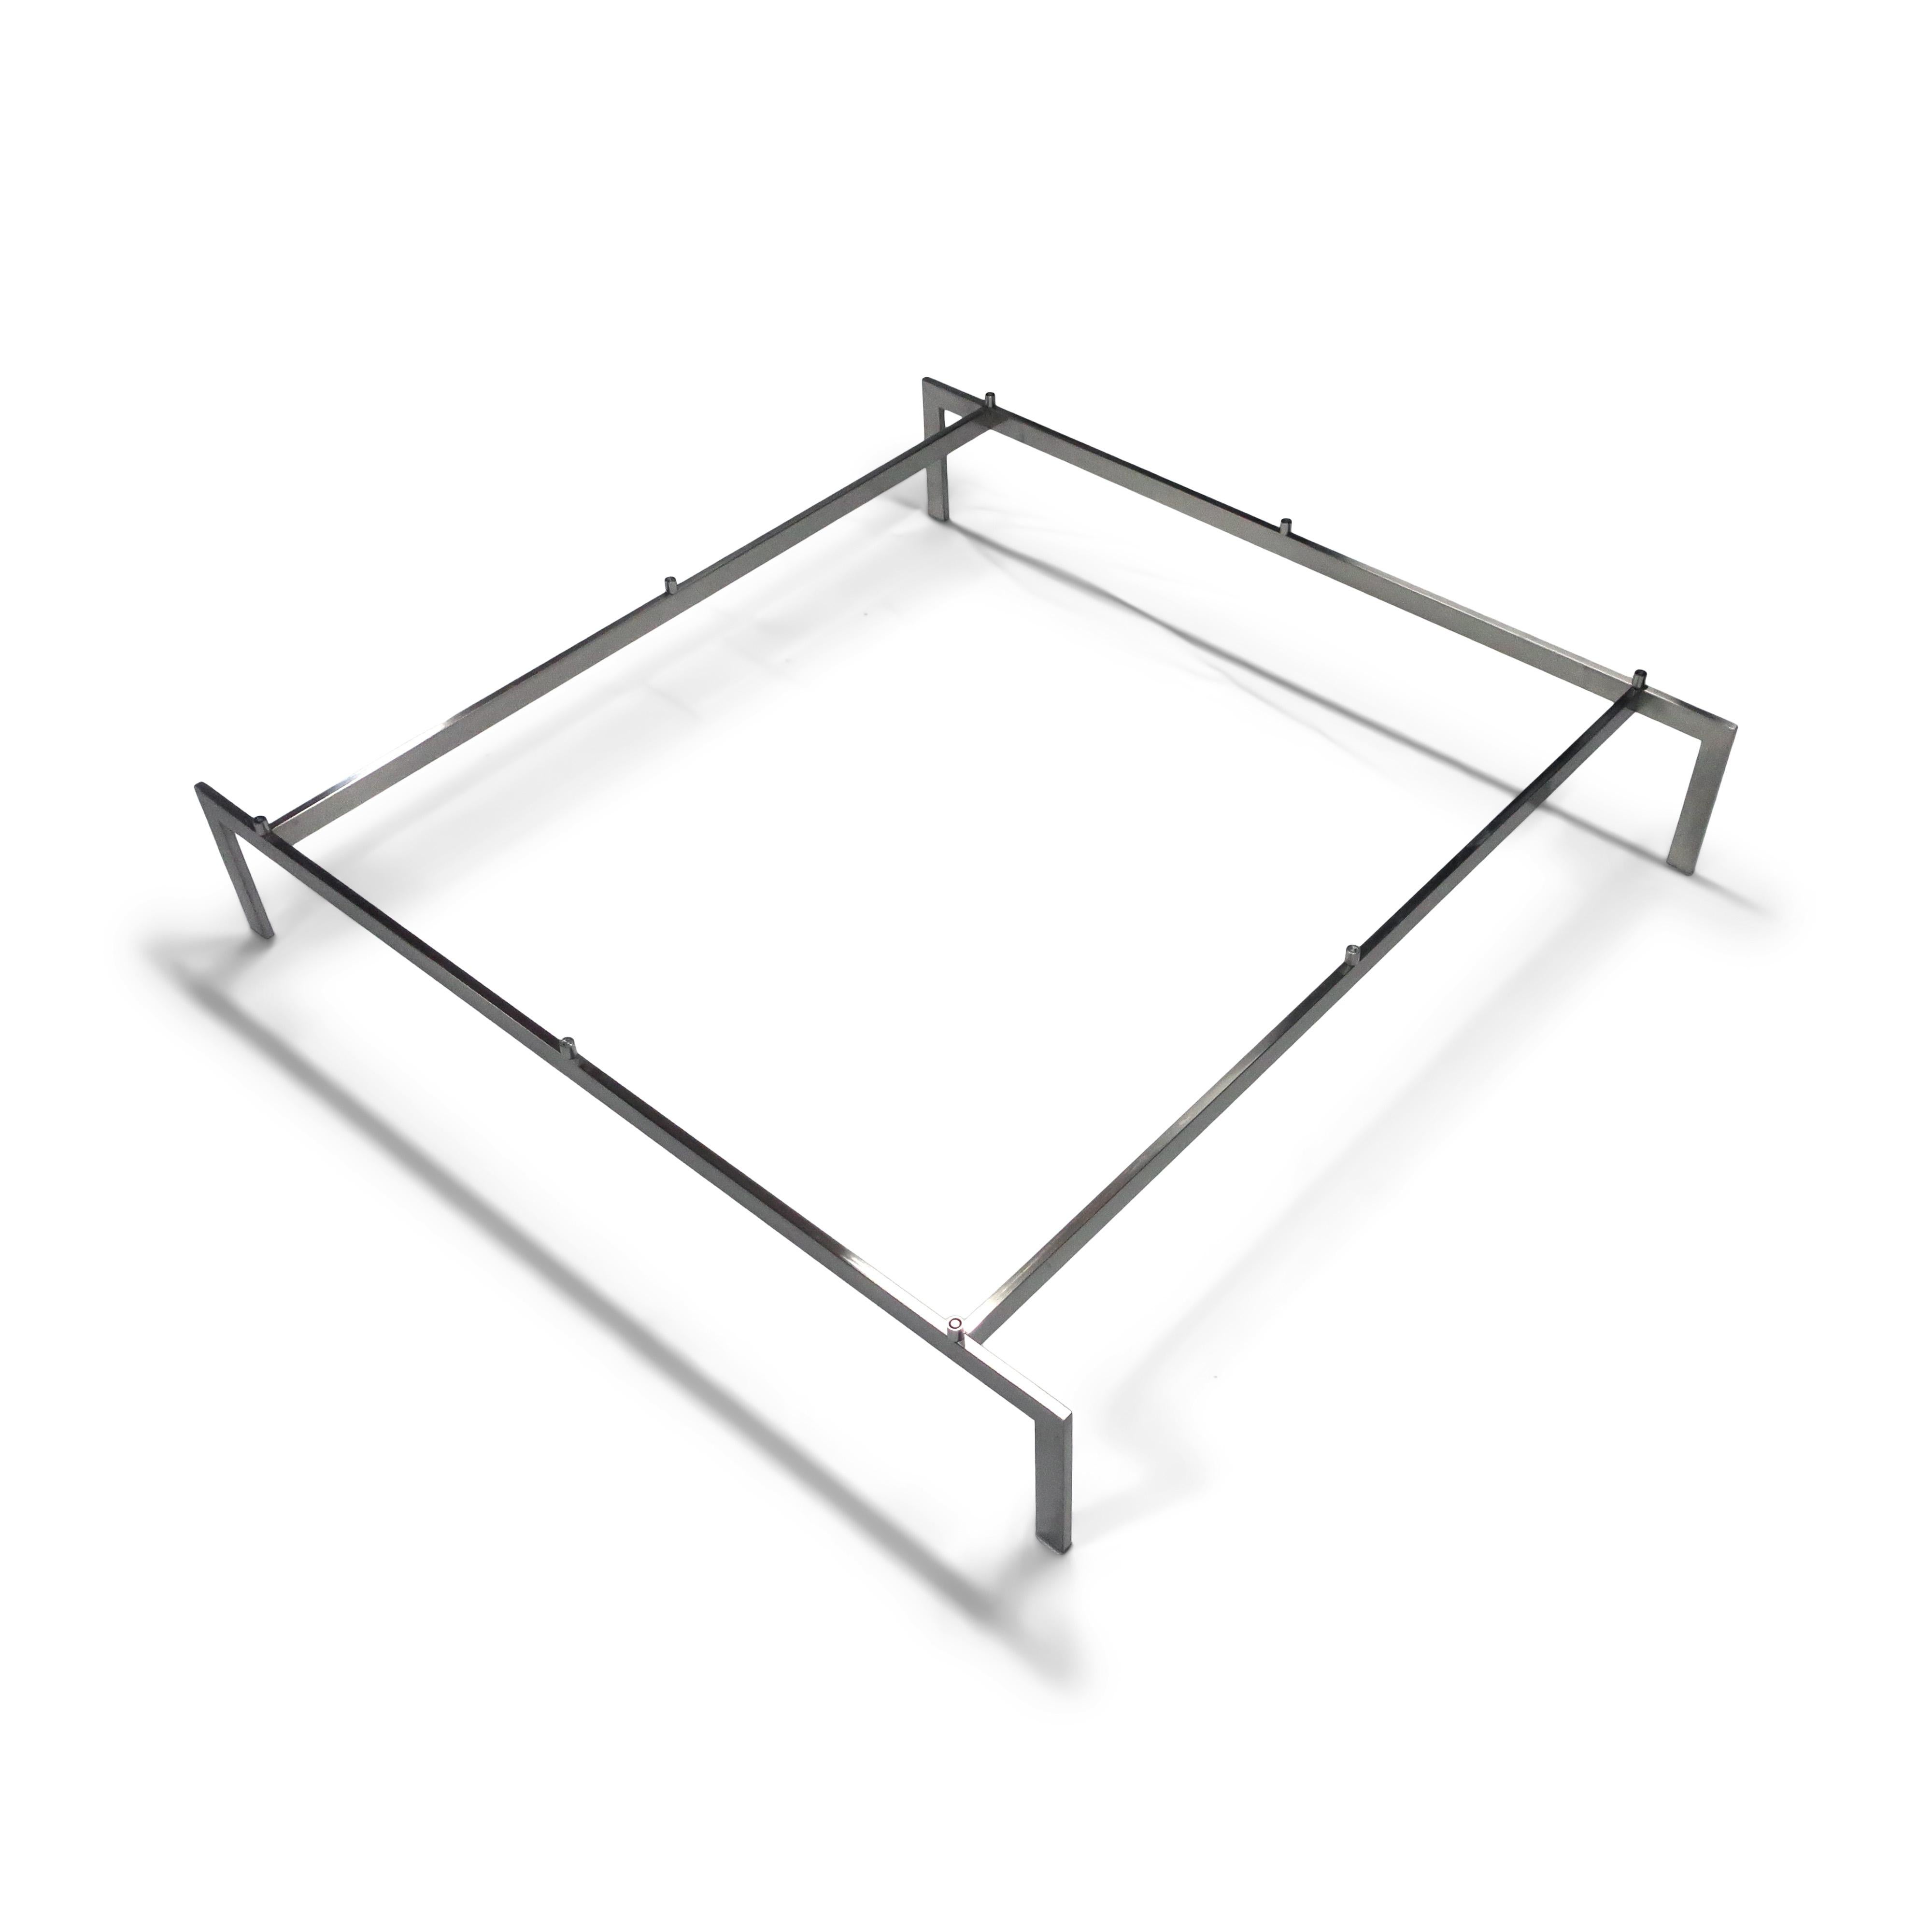 Metal White Metro 2 Cocktail Table by Piero Lissoni for Living Divani For Sale